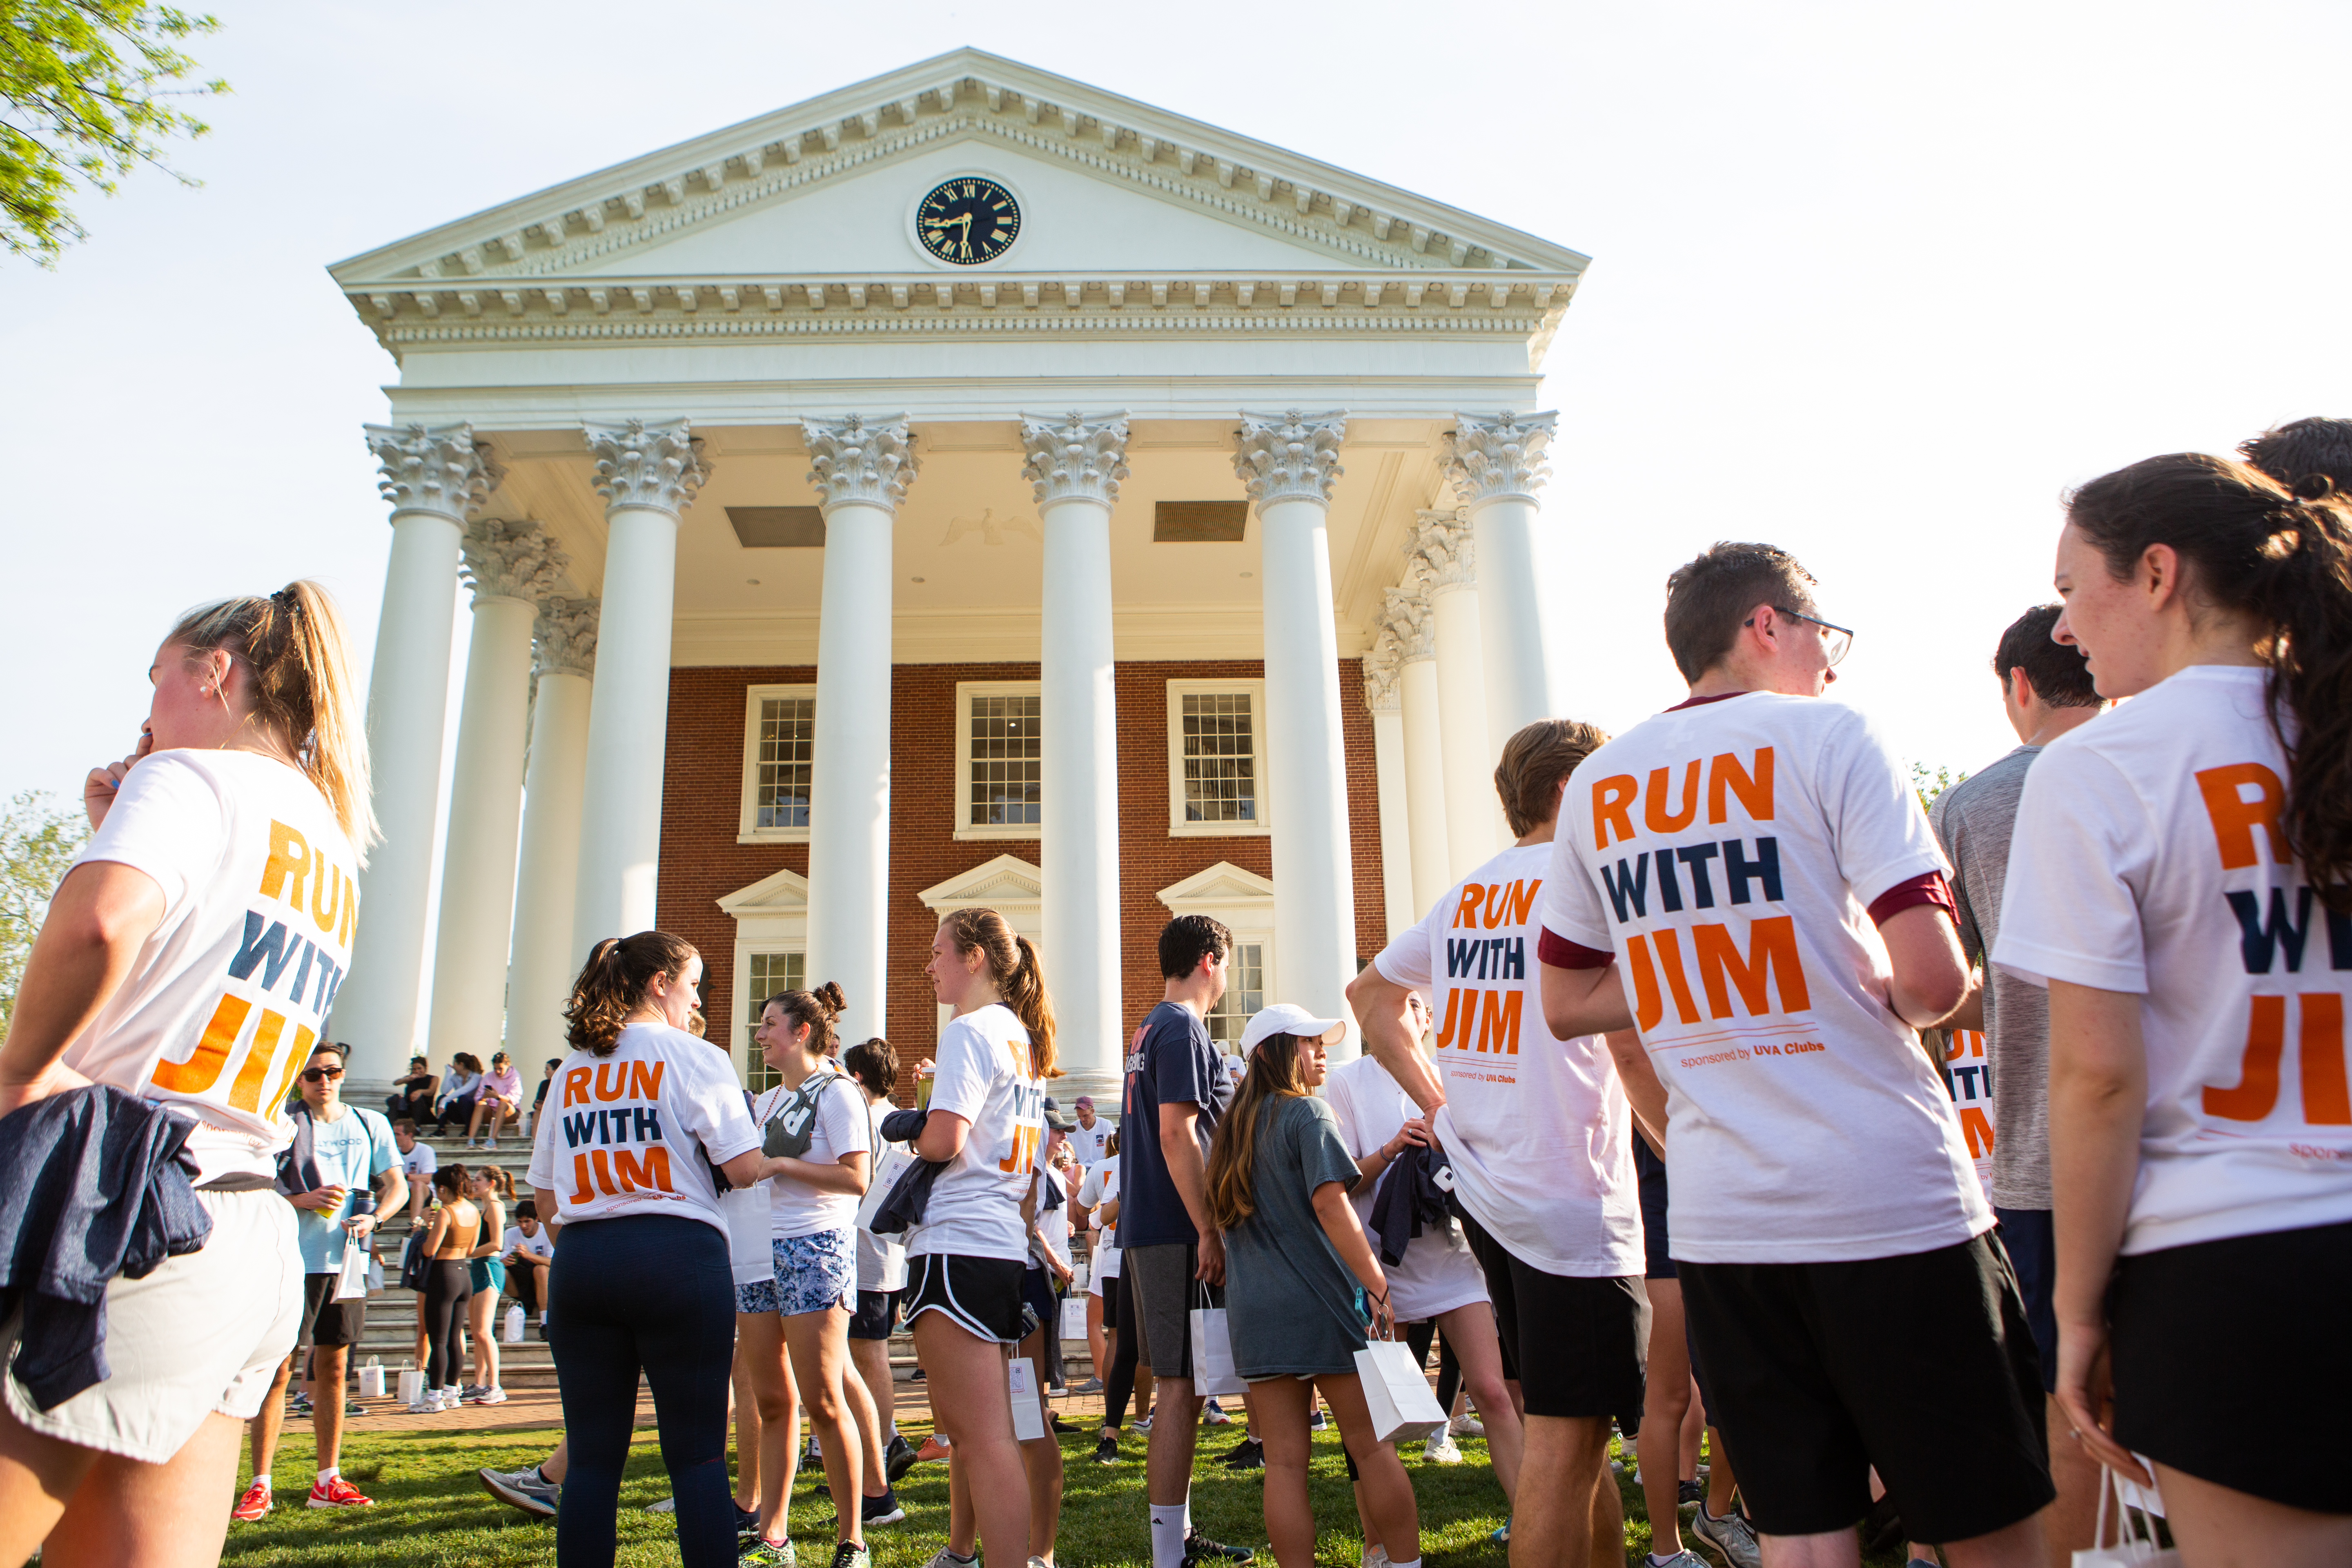 4TH Year students standing in front of the rotunda wearing "Run with Jim" shirts